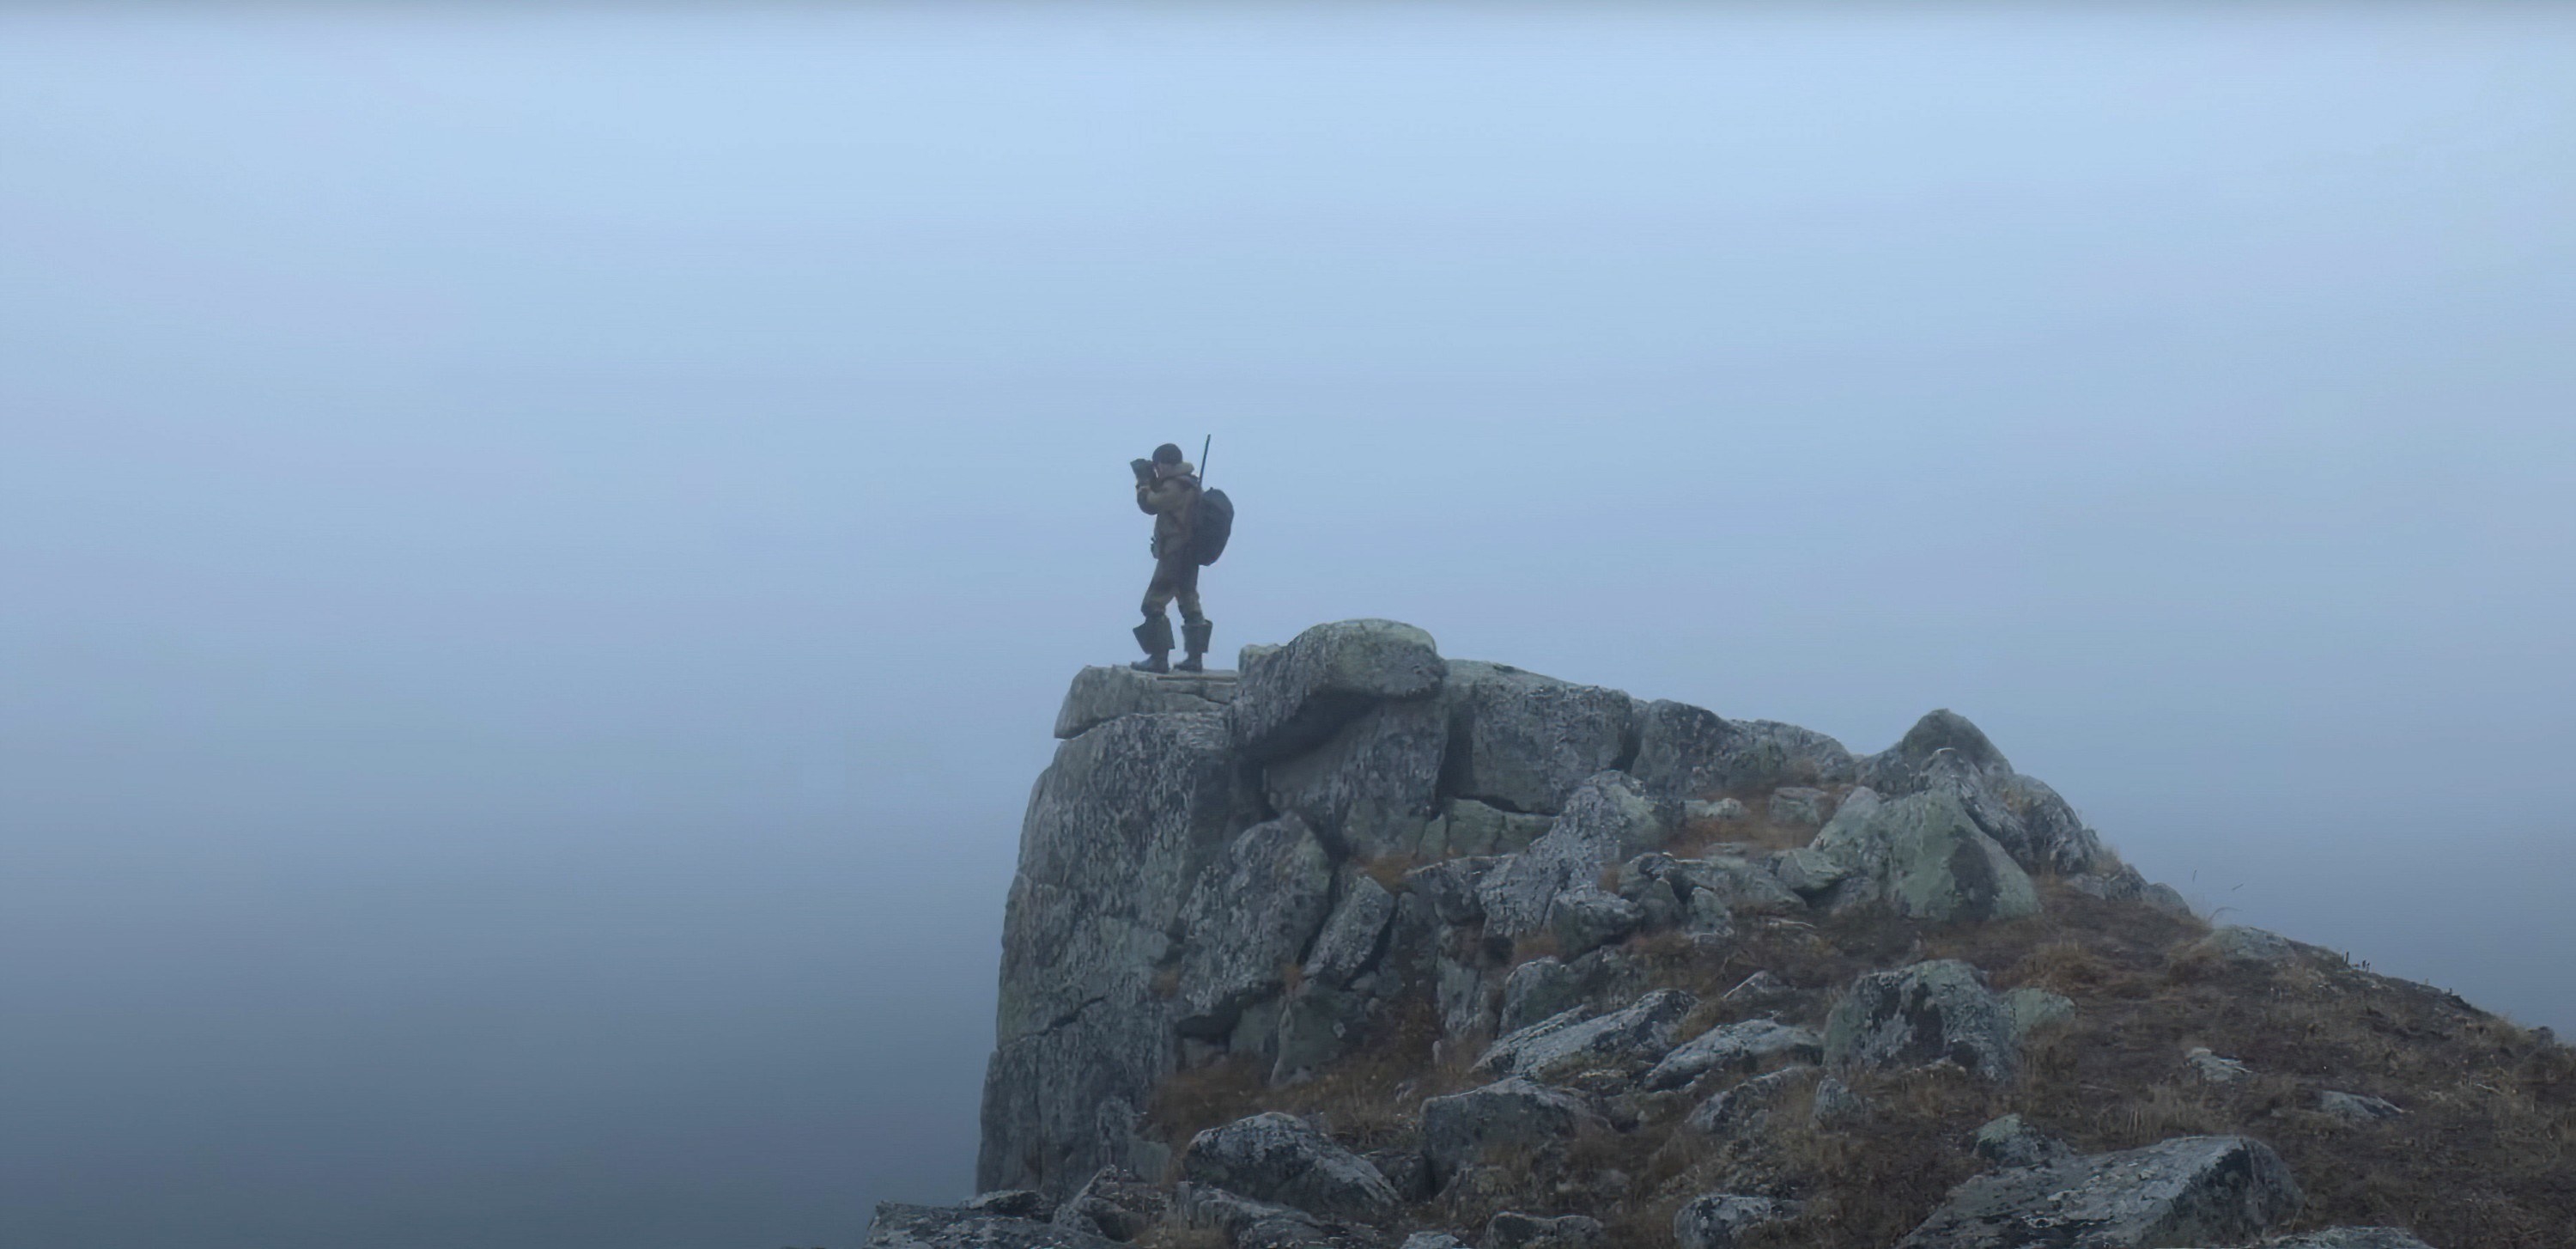 Maxim Chakilev stands on a mountain